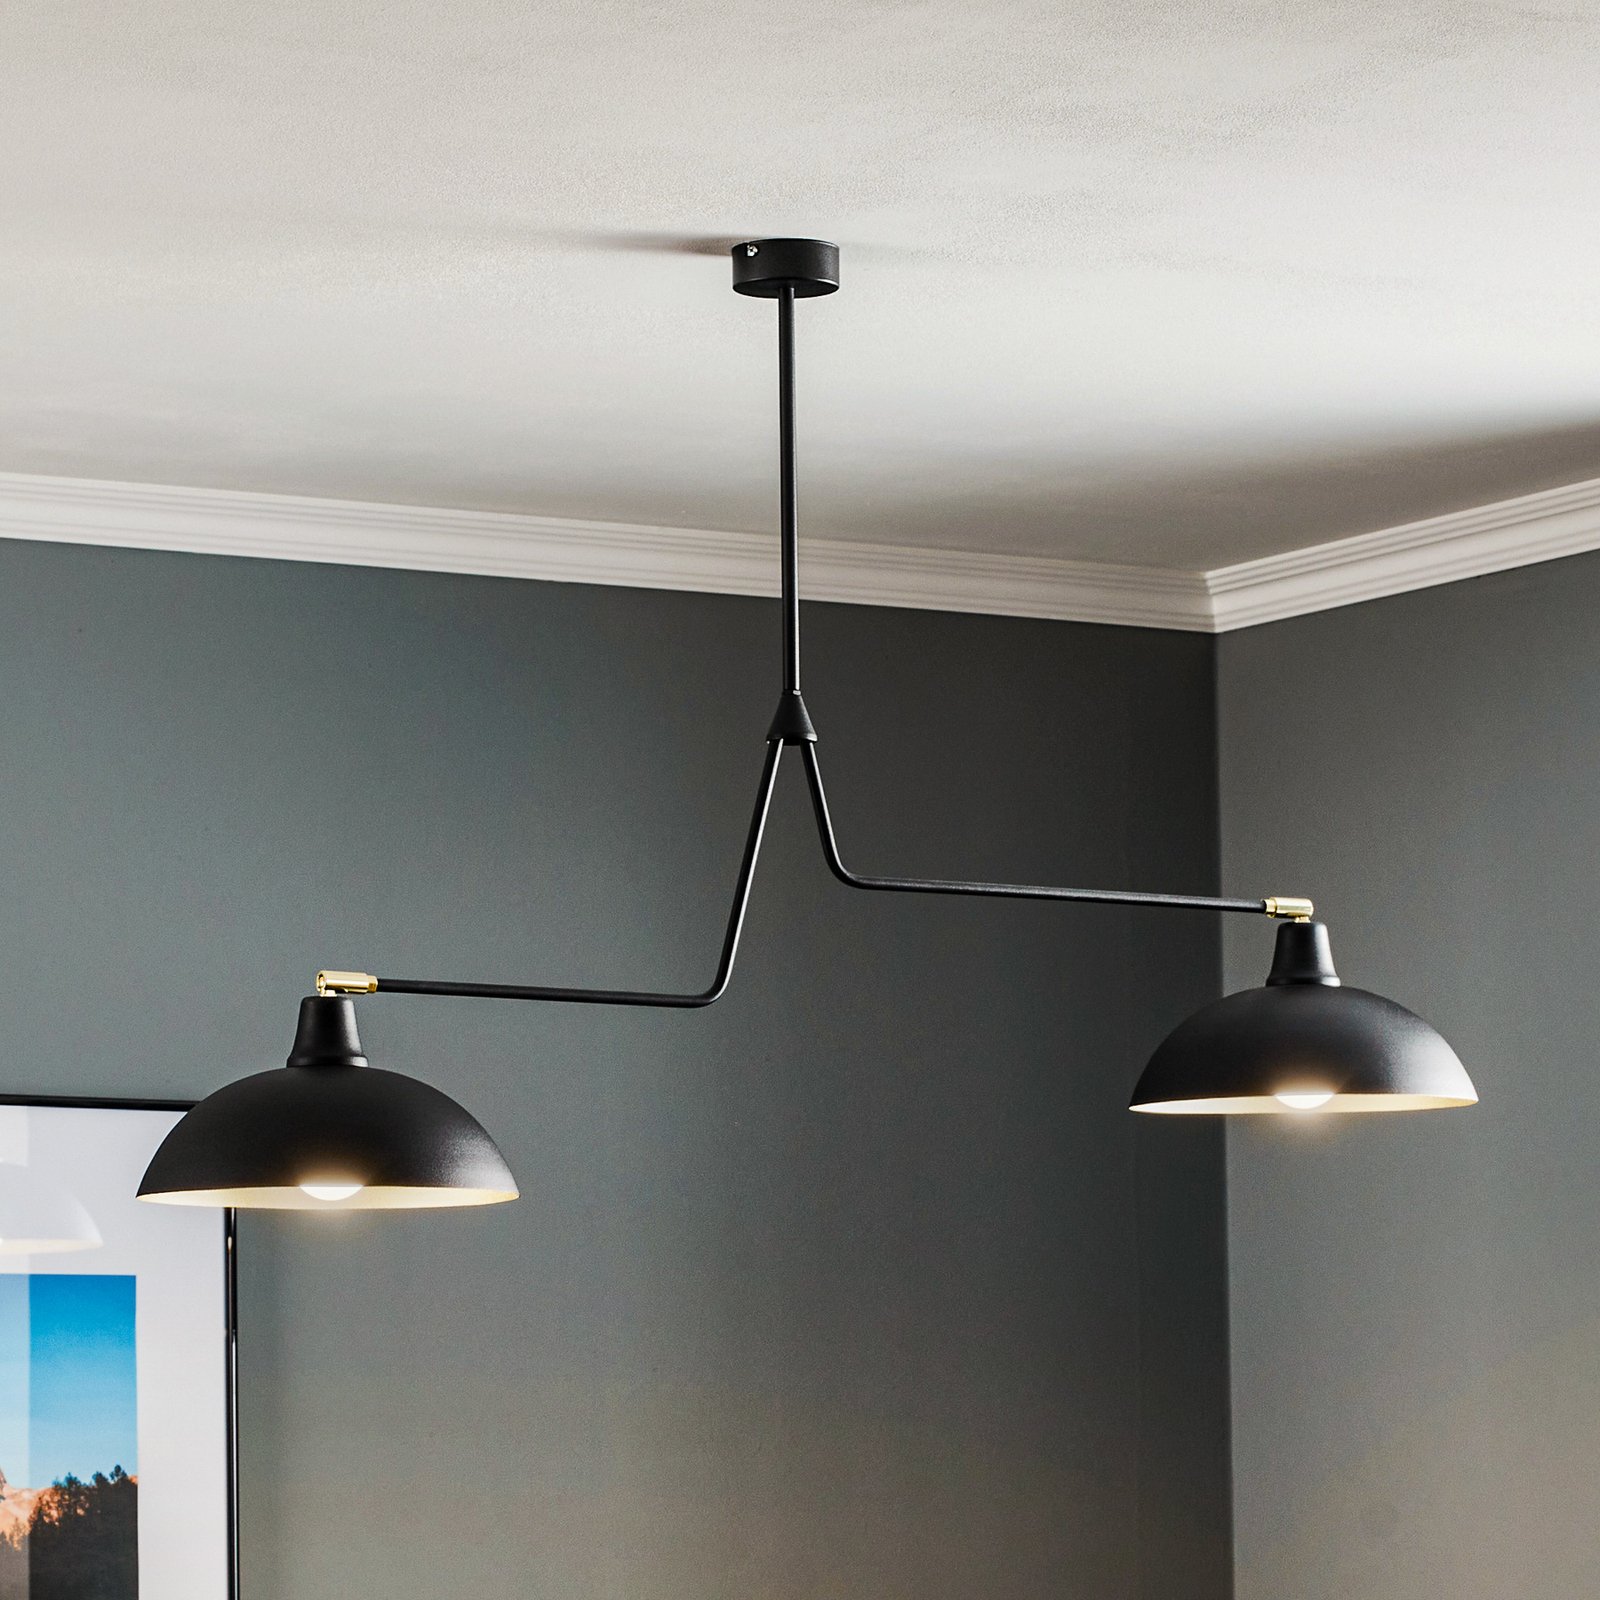 1036 hanging light, two-bulb, black and gold